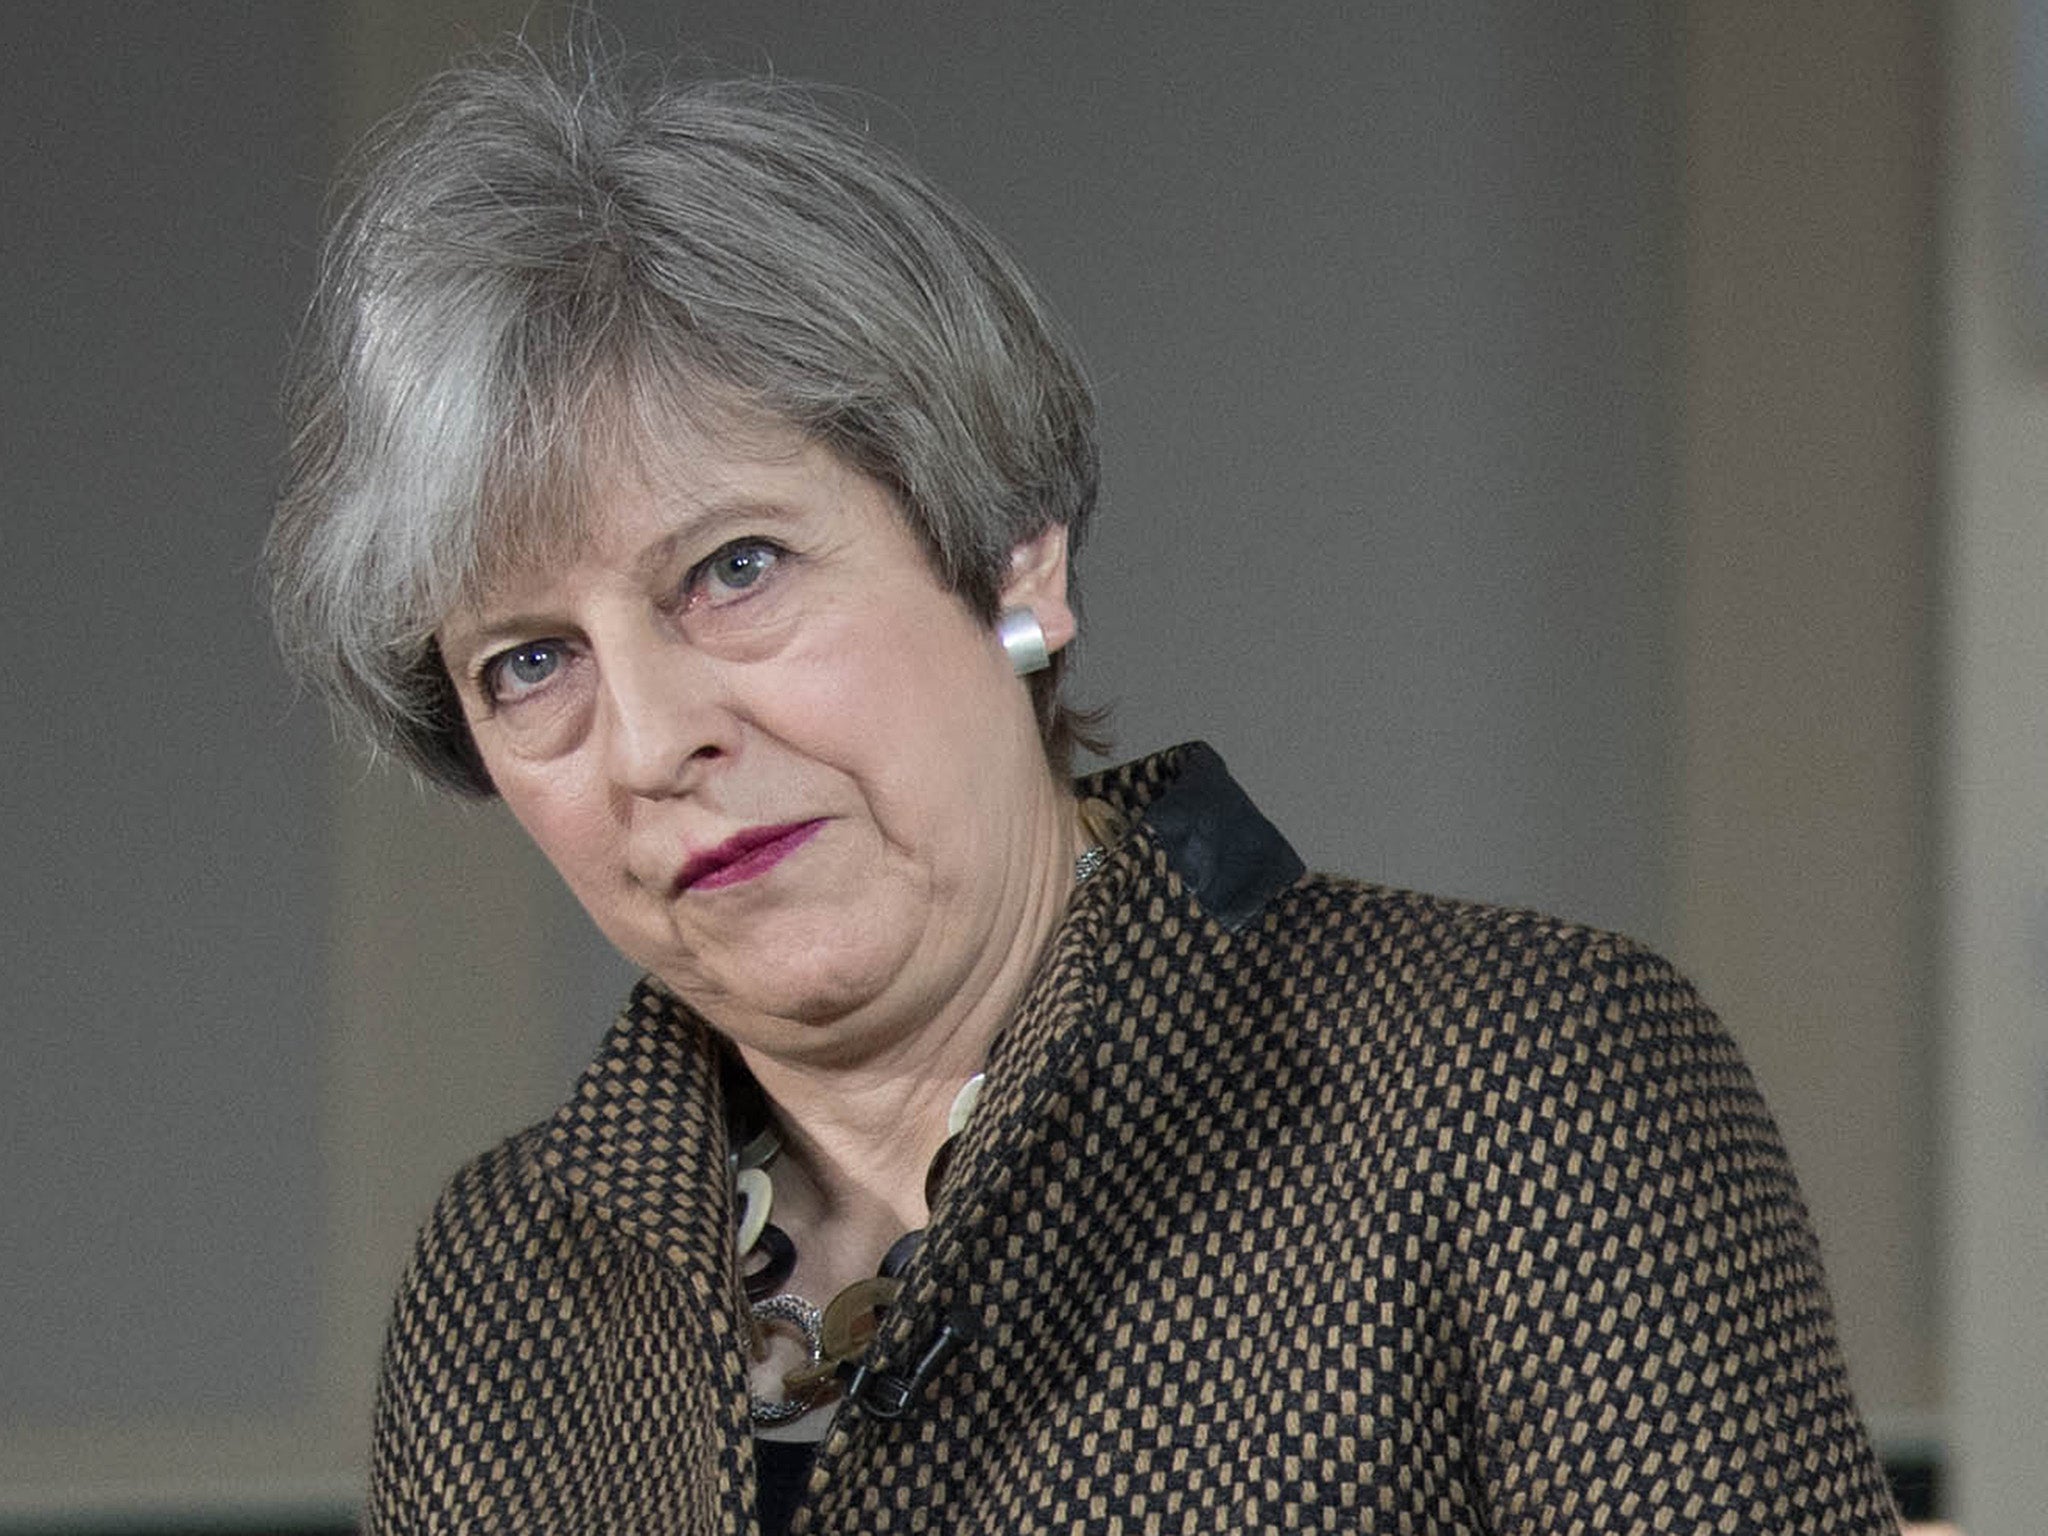 Theresa May's Government has been accused of using the threat of a ‘coalition of chaos’ in a ploy to turn voters against left-wing parties